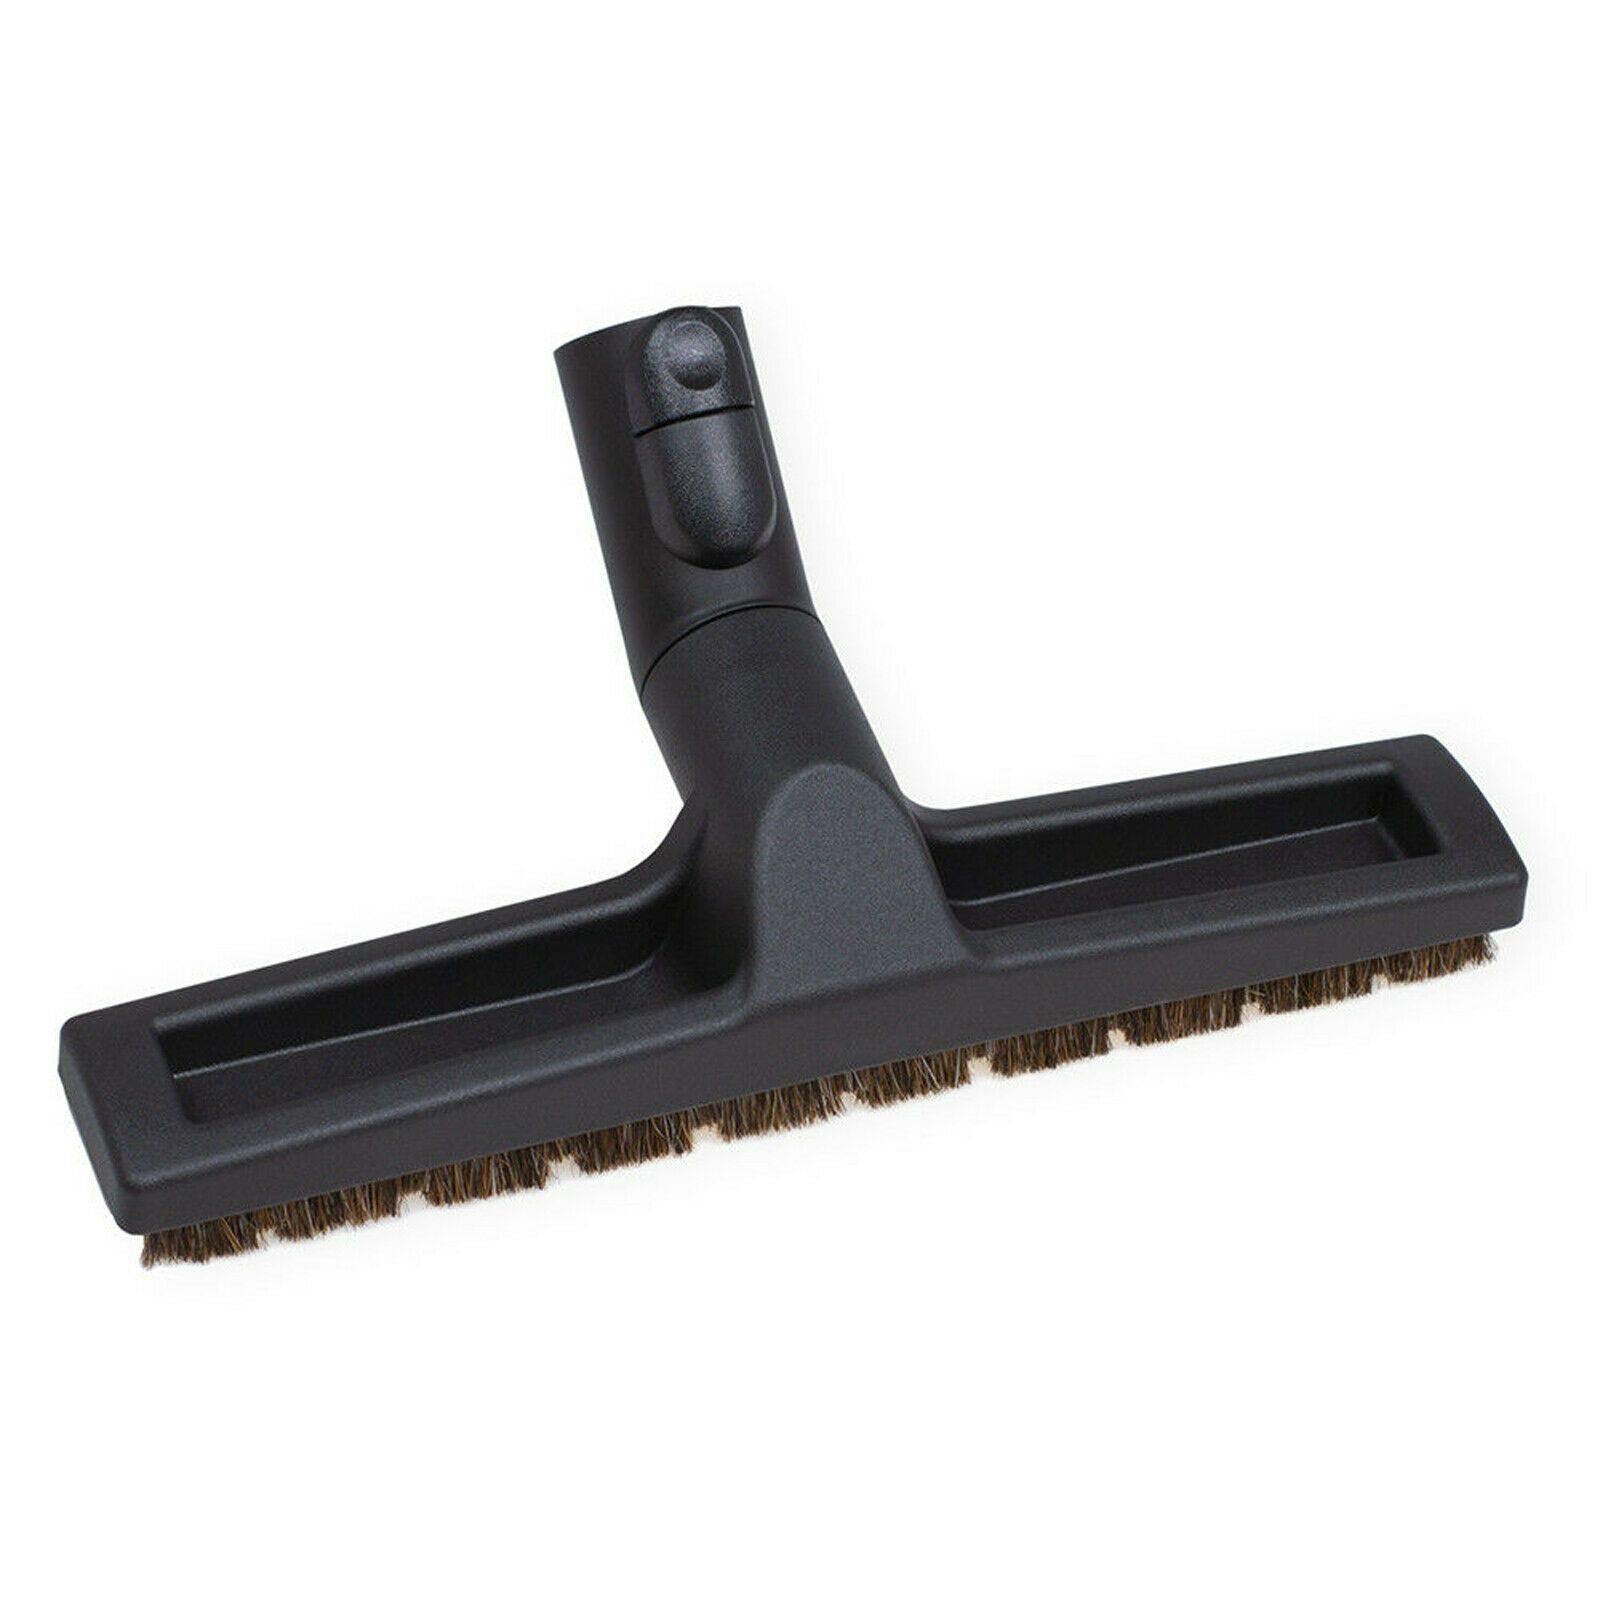 Vacuum Cleaner Nozzle Floor Brush Head for Miele S2000 S2 S8000 S8 Sparesbarn